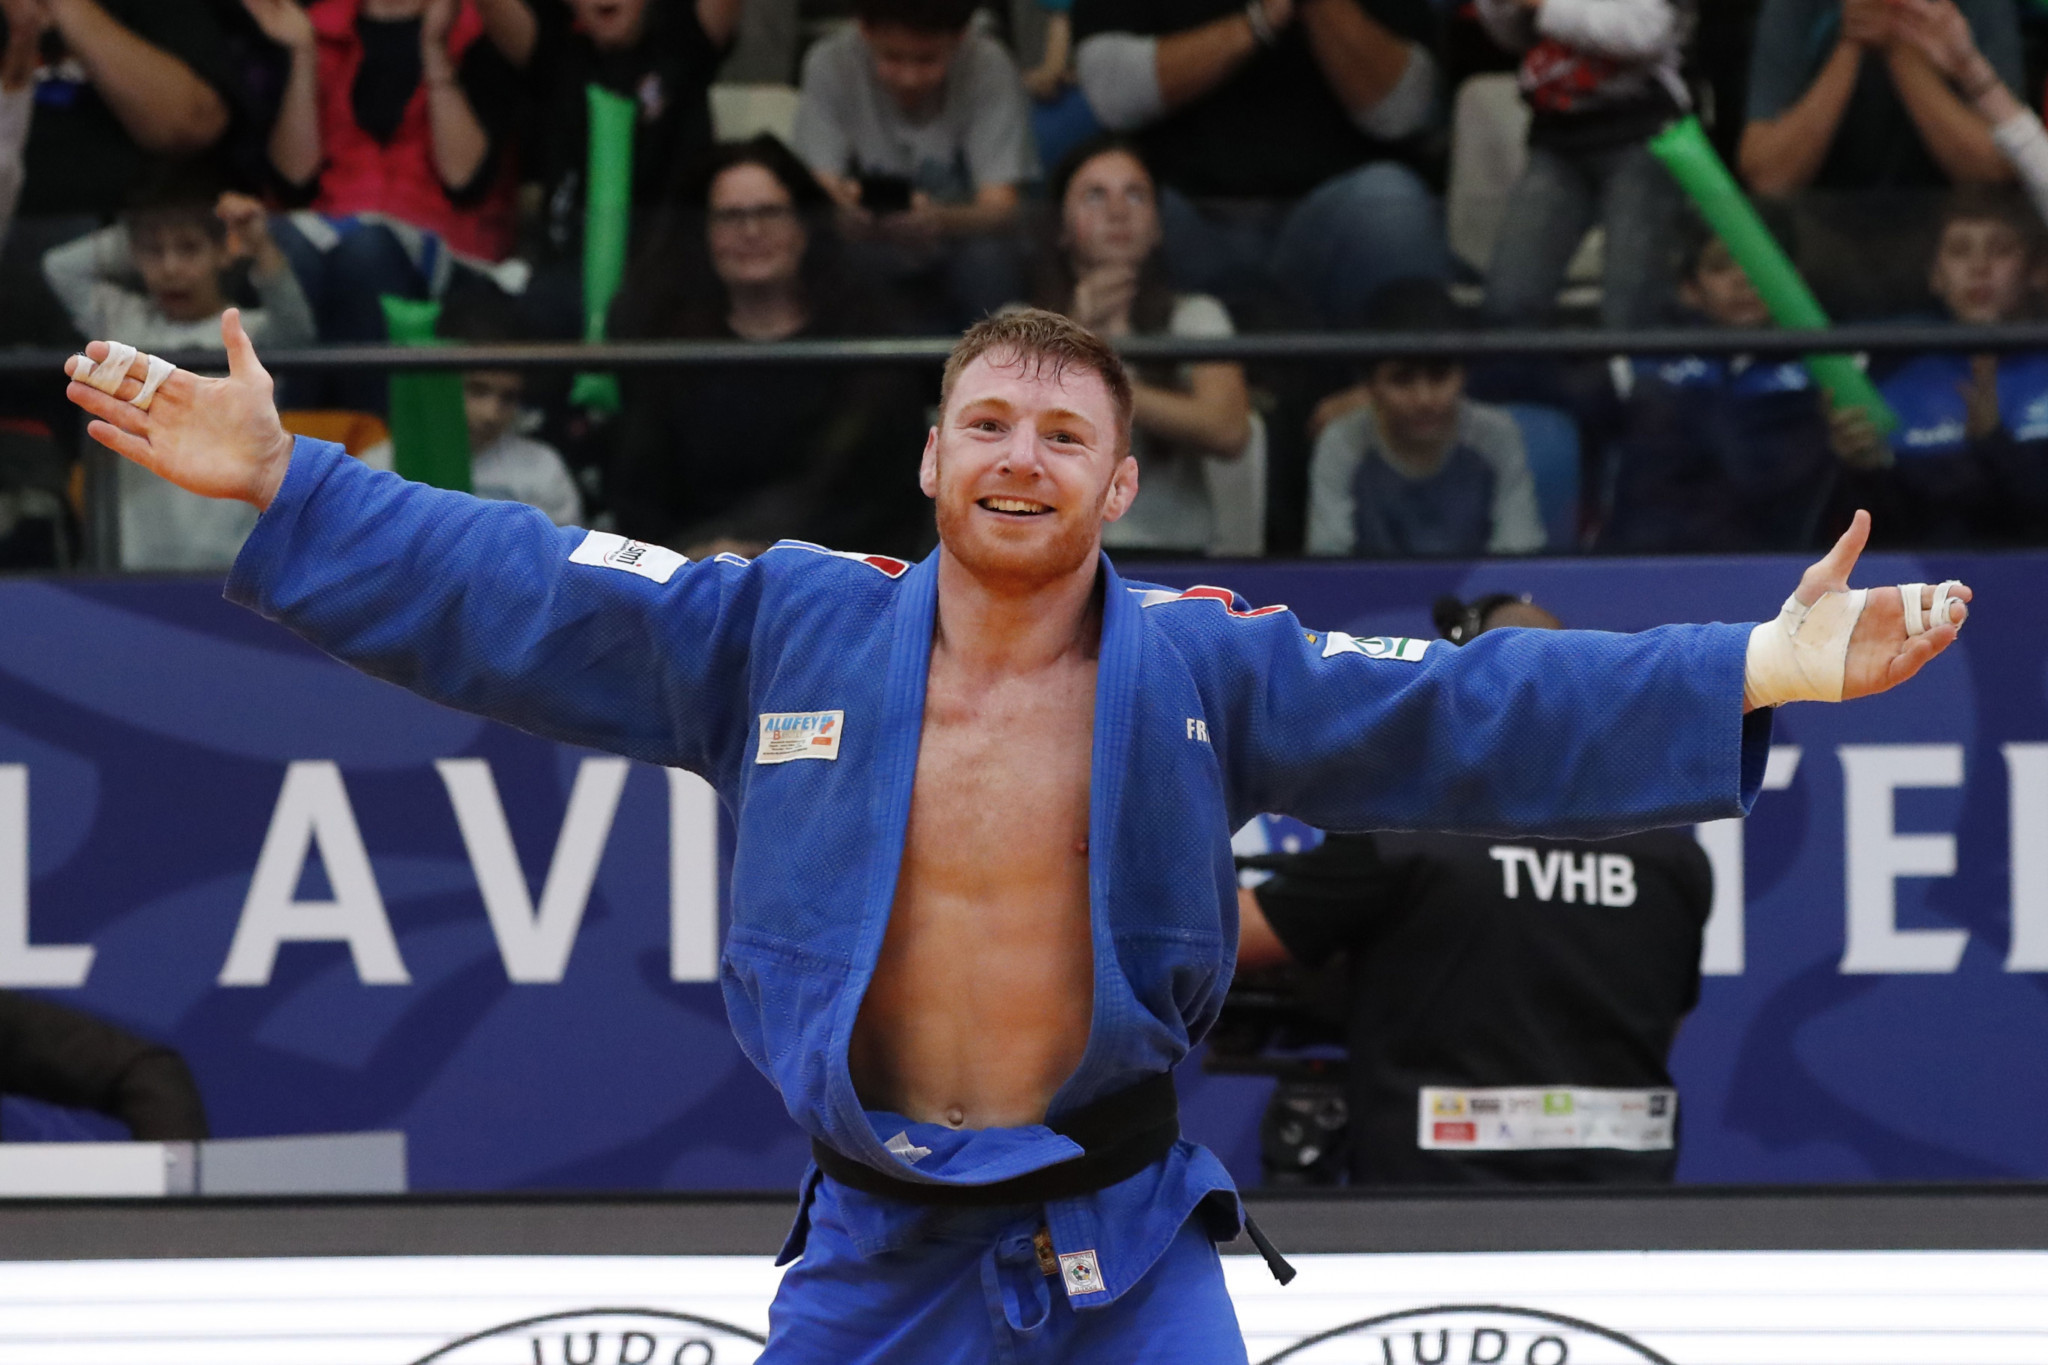 France win two golds as Israel end top at IJF Tel Aviv Grand Prix